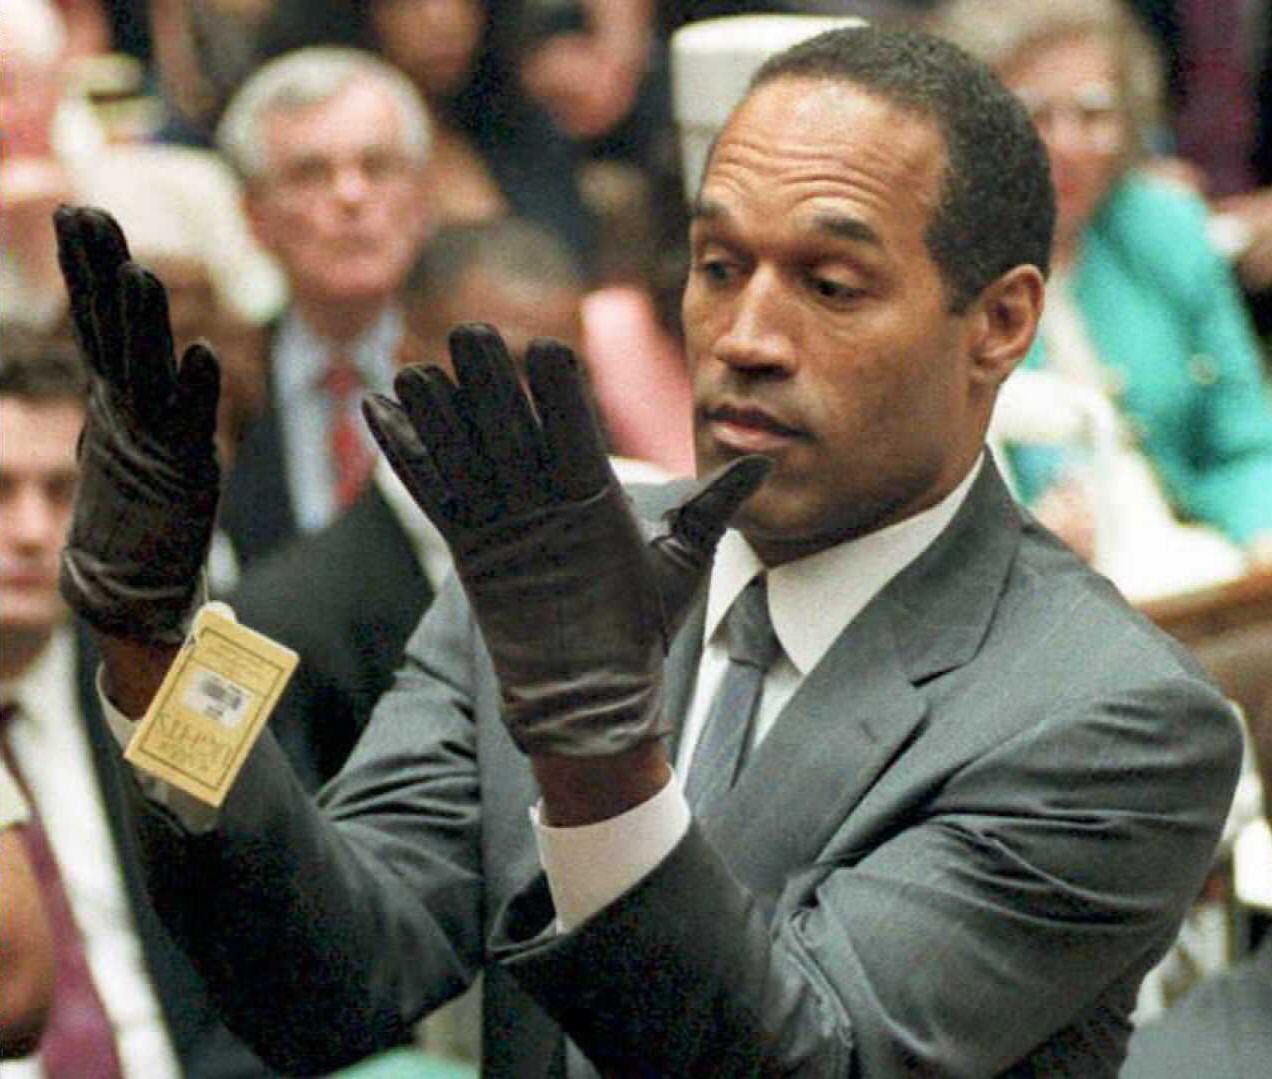 OJ Simpson famously tried on the gloves during the trial over the murder of Nicole Brown Simpson that became known as the “trial of the century”